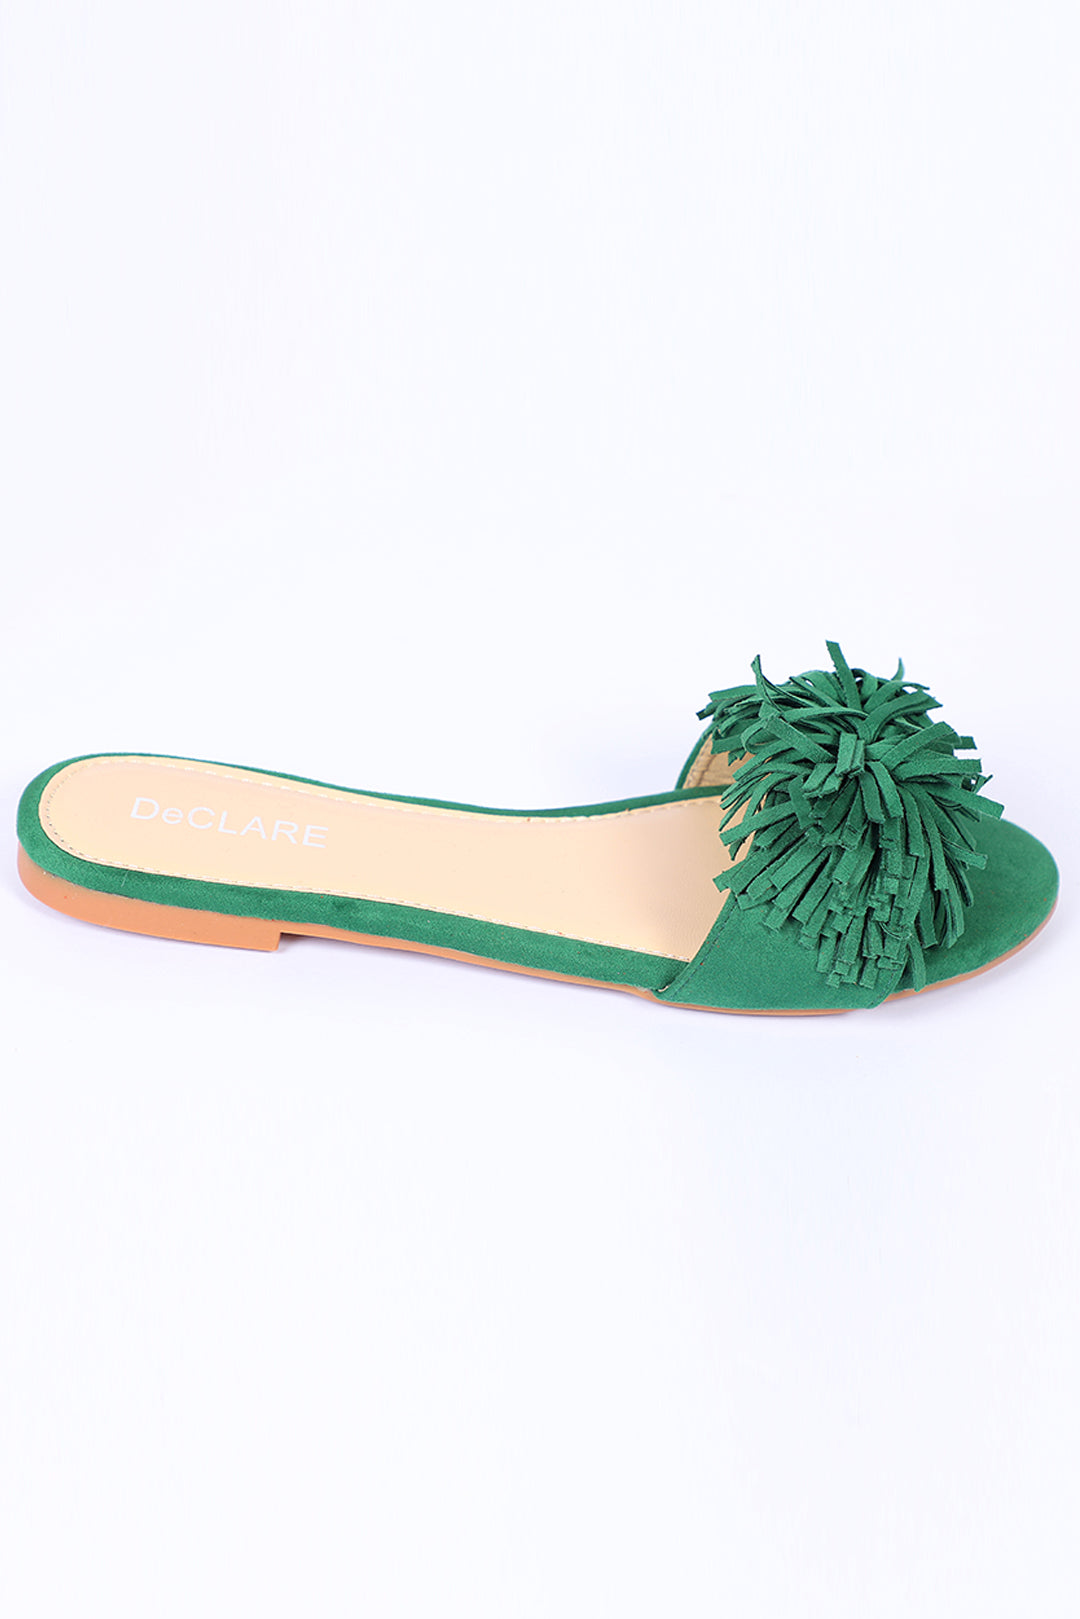 Shoes P2455 - Green